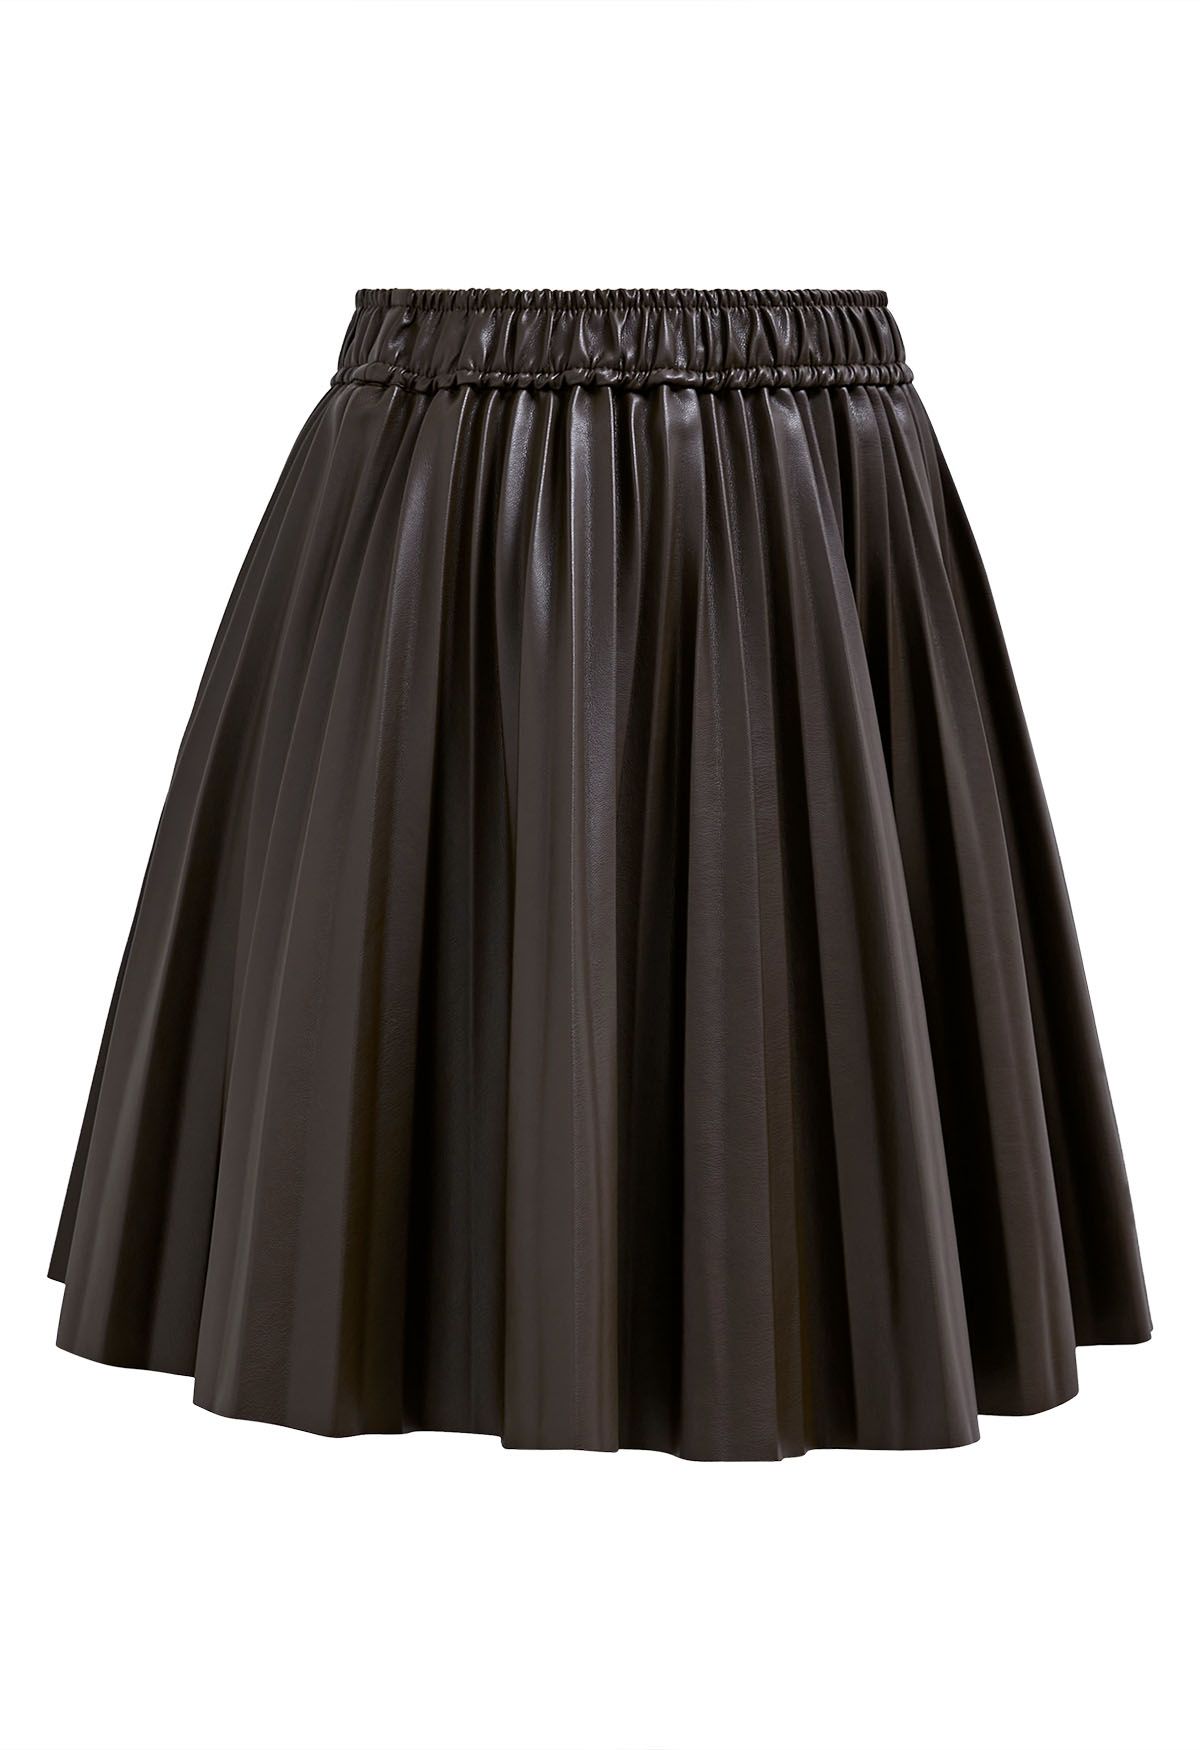 Faux Leather Pleated Mini Skirt in Brown - Retro, Indie and Unique Fashion